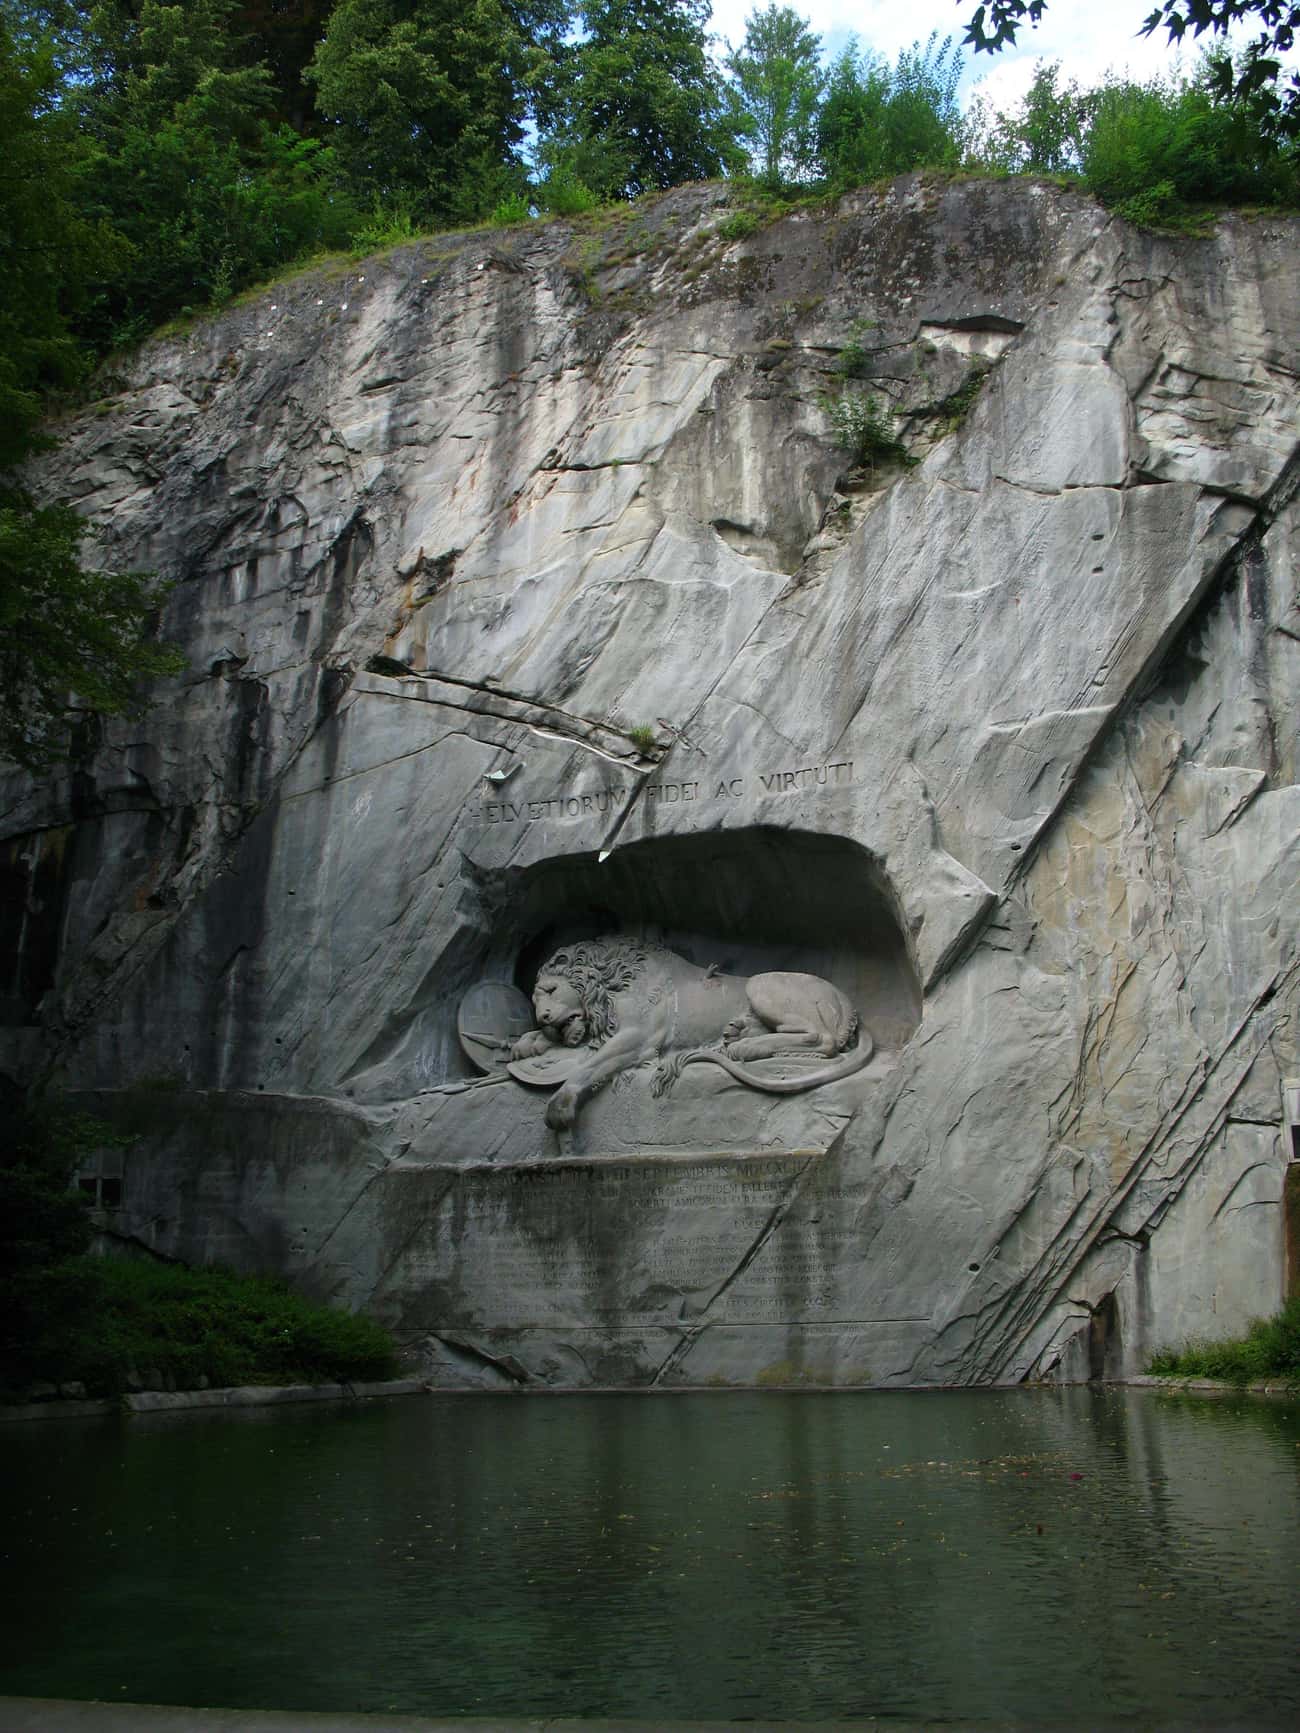 In 1820, The Lion Of Lucerne Was Carved In Stone To Commemorate The Swiss Soldiers Who Died During The French Revolution